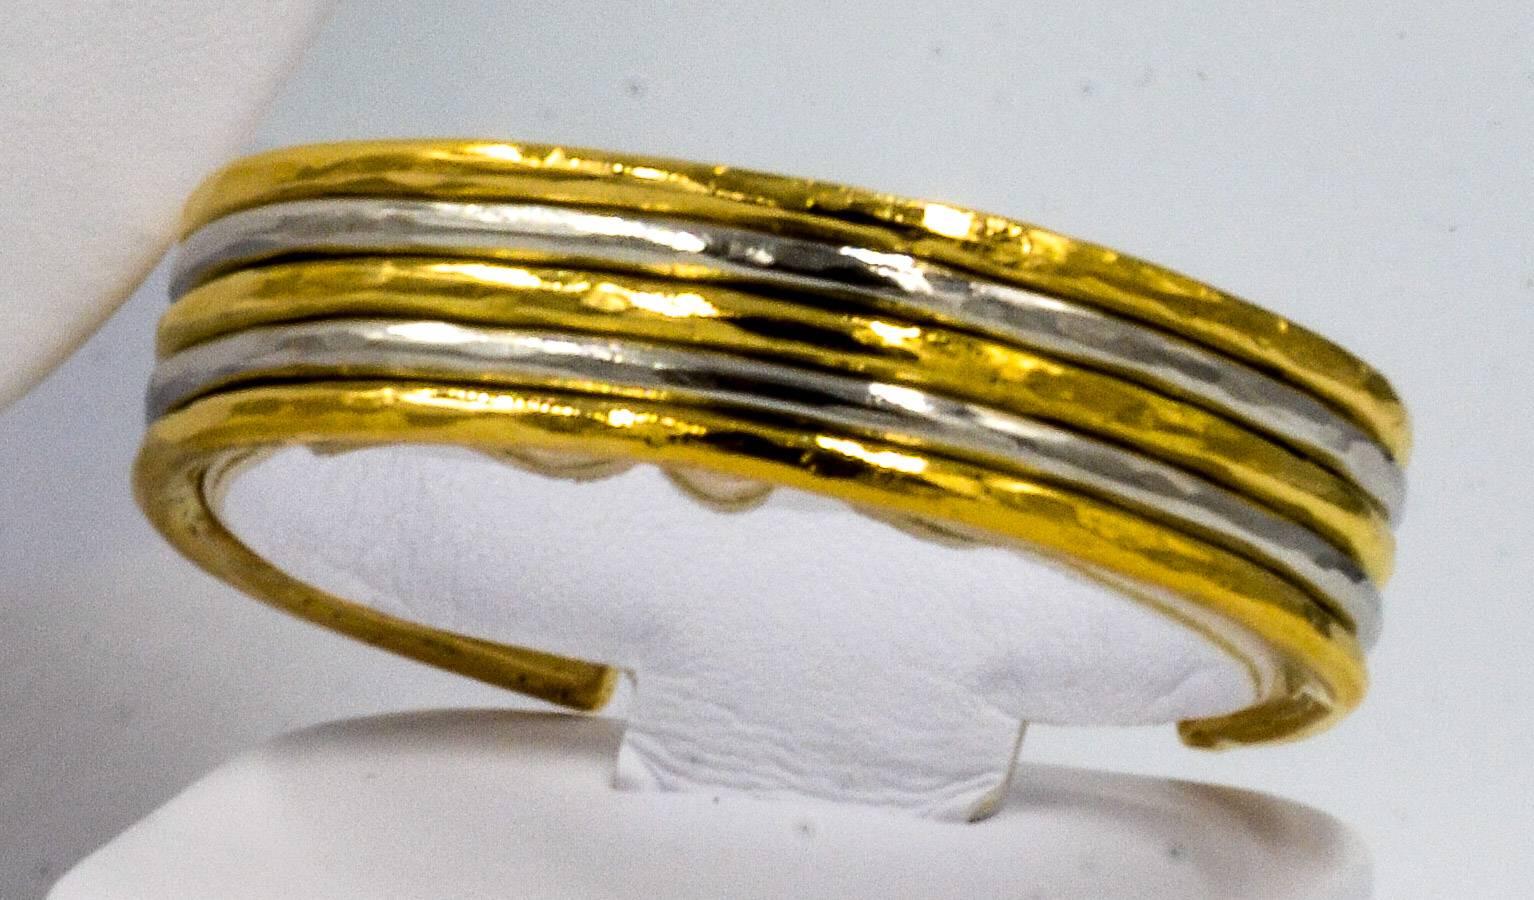 A unique and classic high contrasting two tone 18kt yellow gold and platinum Jean Mahie cuff bracelet.  This is a very unique Jean Mahie cuff due to the artful use of the two tone metals finished in the classic Jean Mahie hammered finished style.